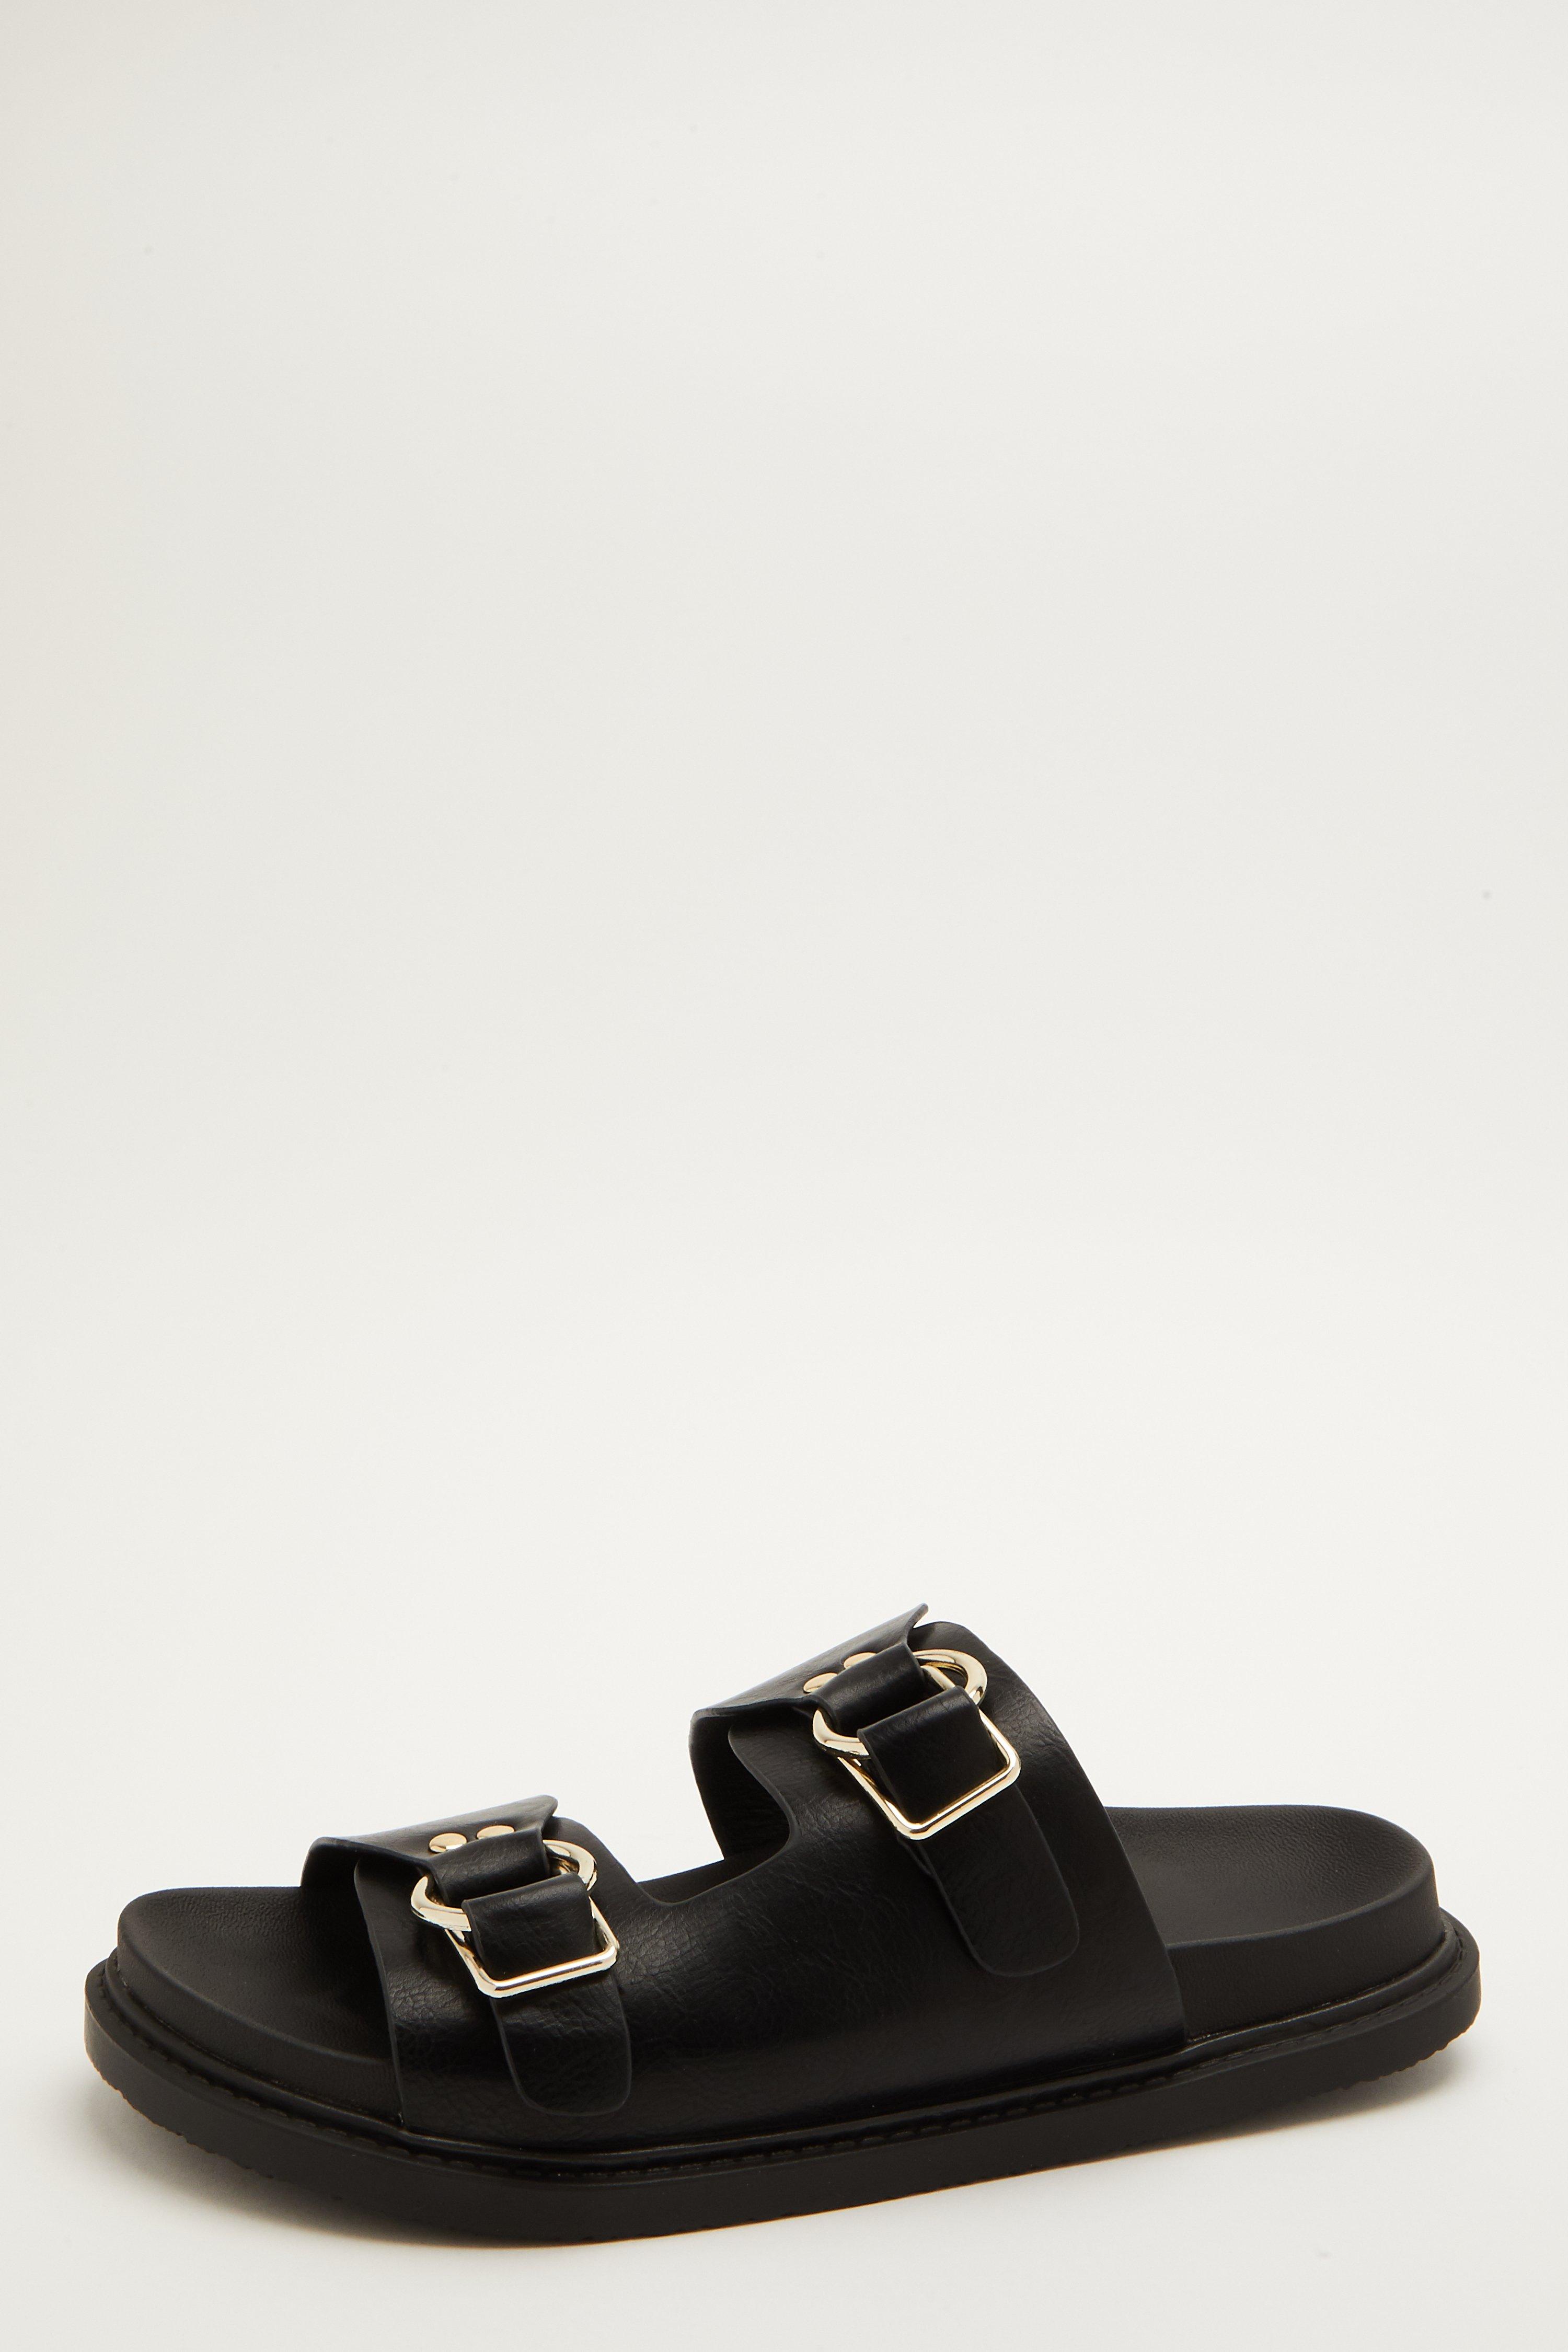 Black Faux Leather Buckle Sliders - Quiz Clothing